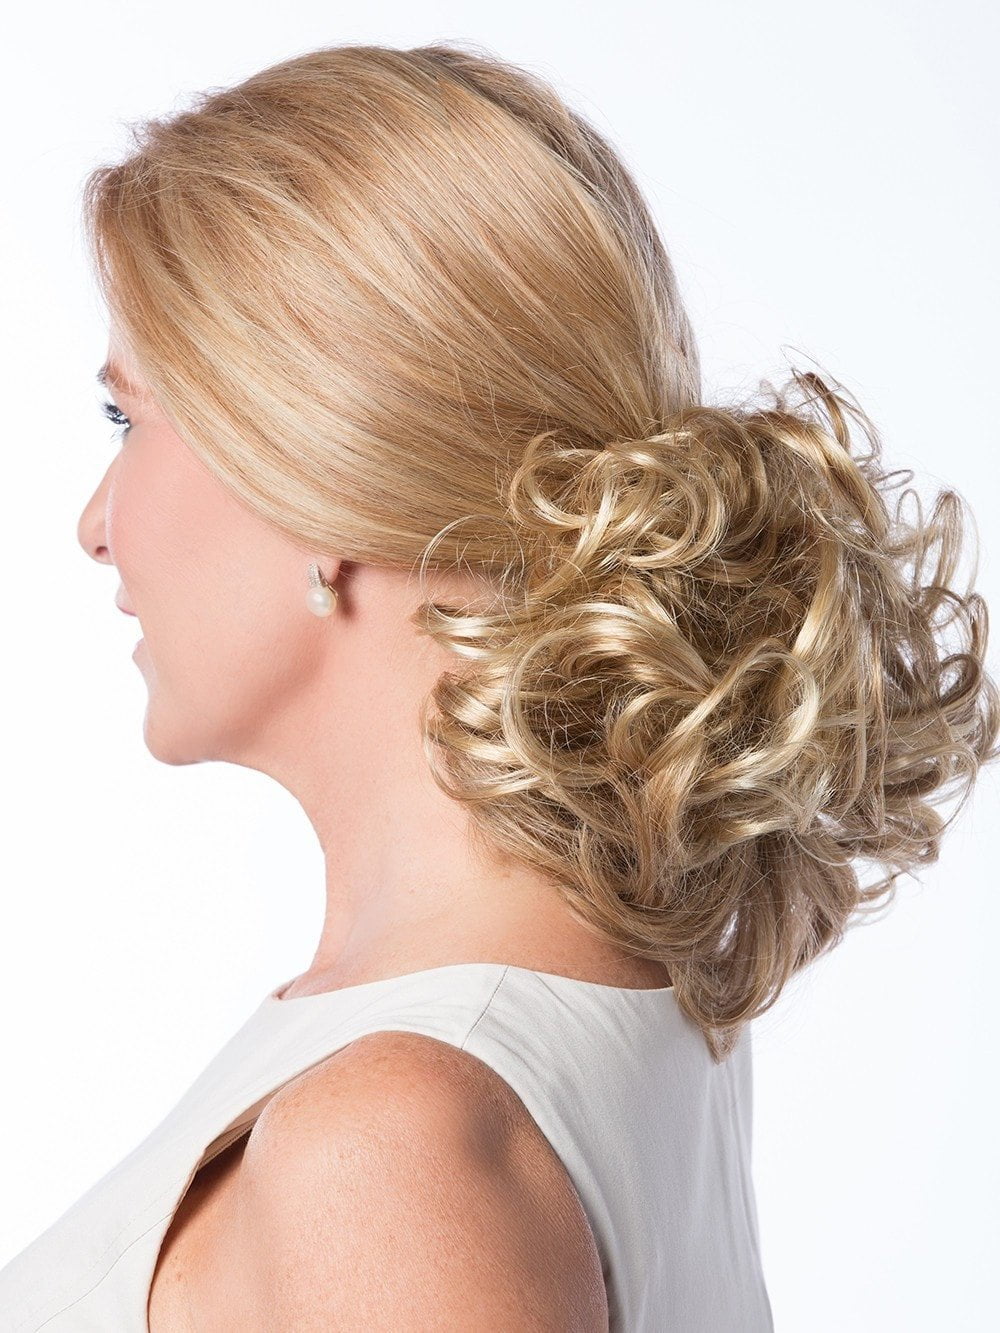 The twin clip petite attaches in seconds, and adds volume for an incredible array of quick and Easy styling solutions